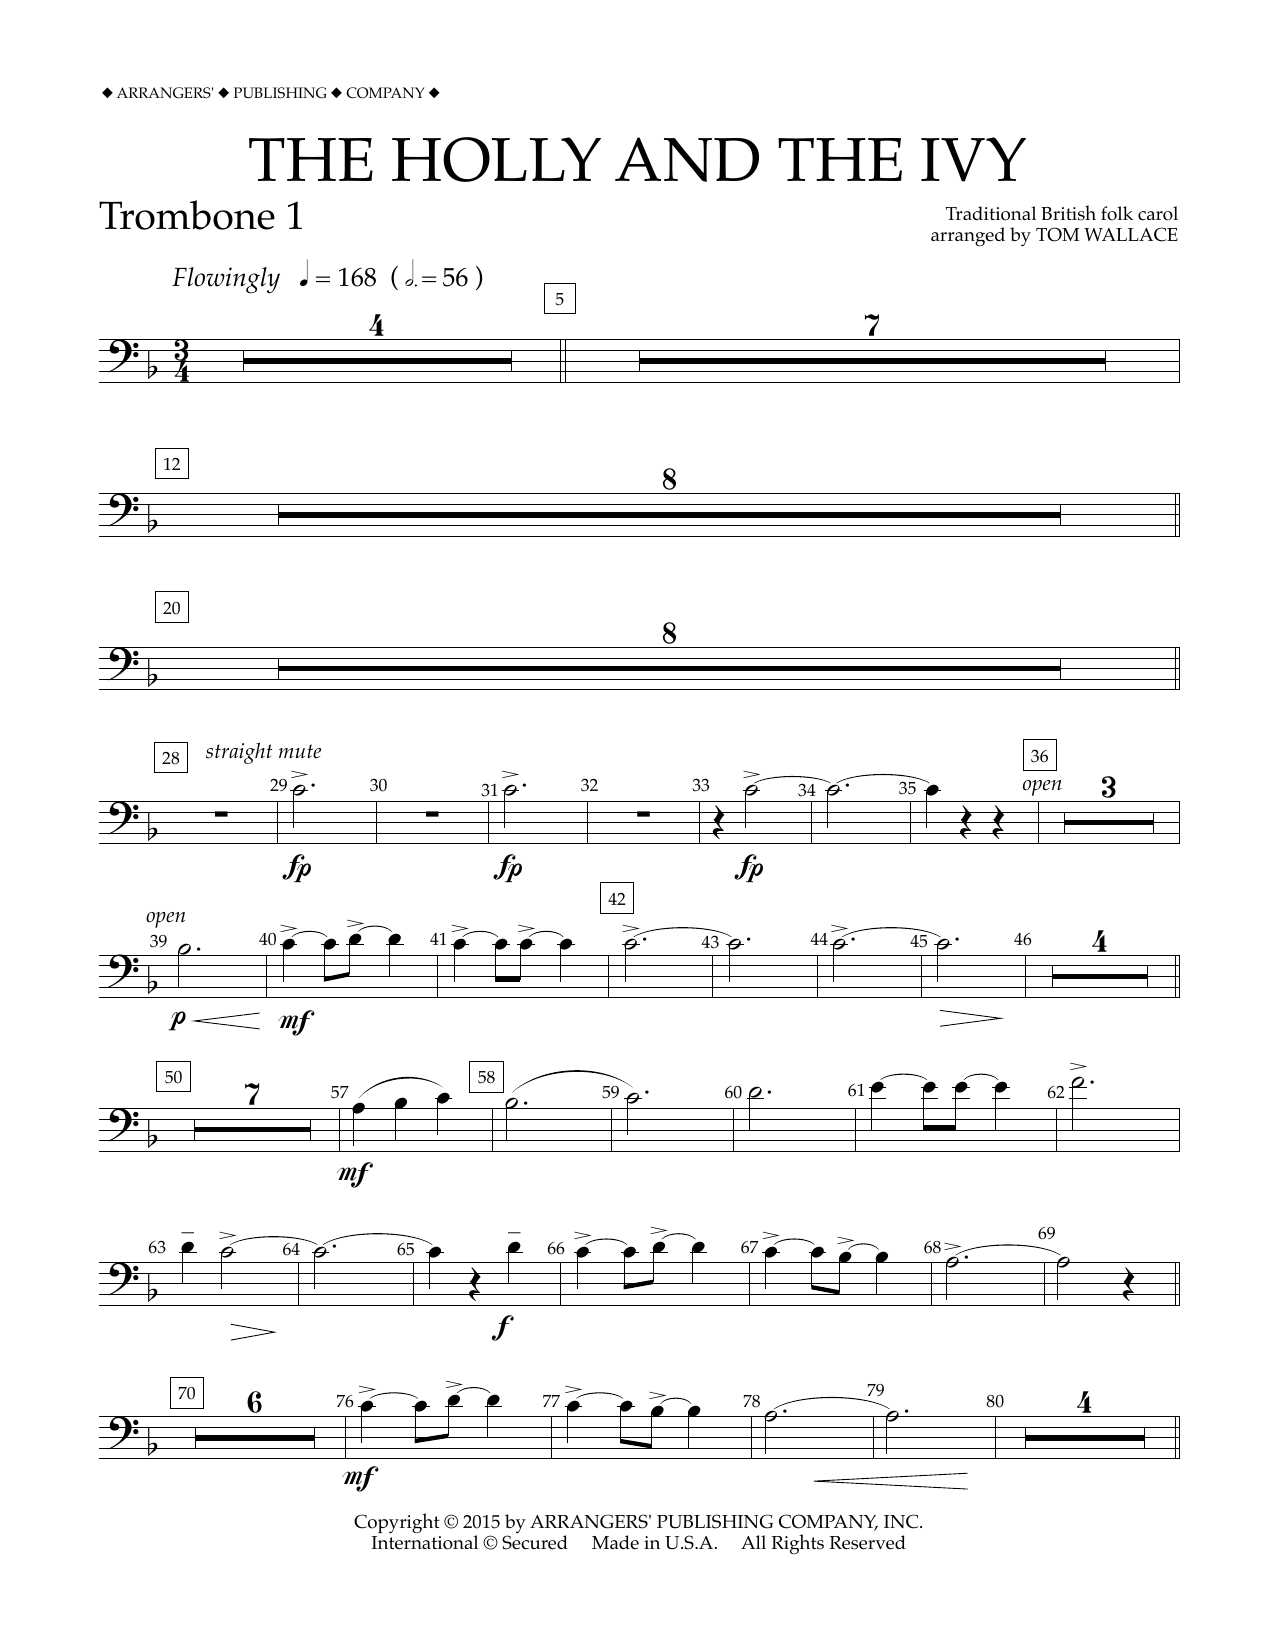 Download Tom Wallace The Holly and the Ivy - Trombone 1 Sheet Music